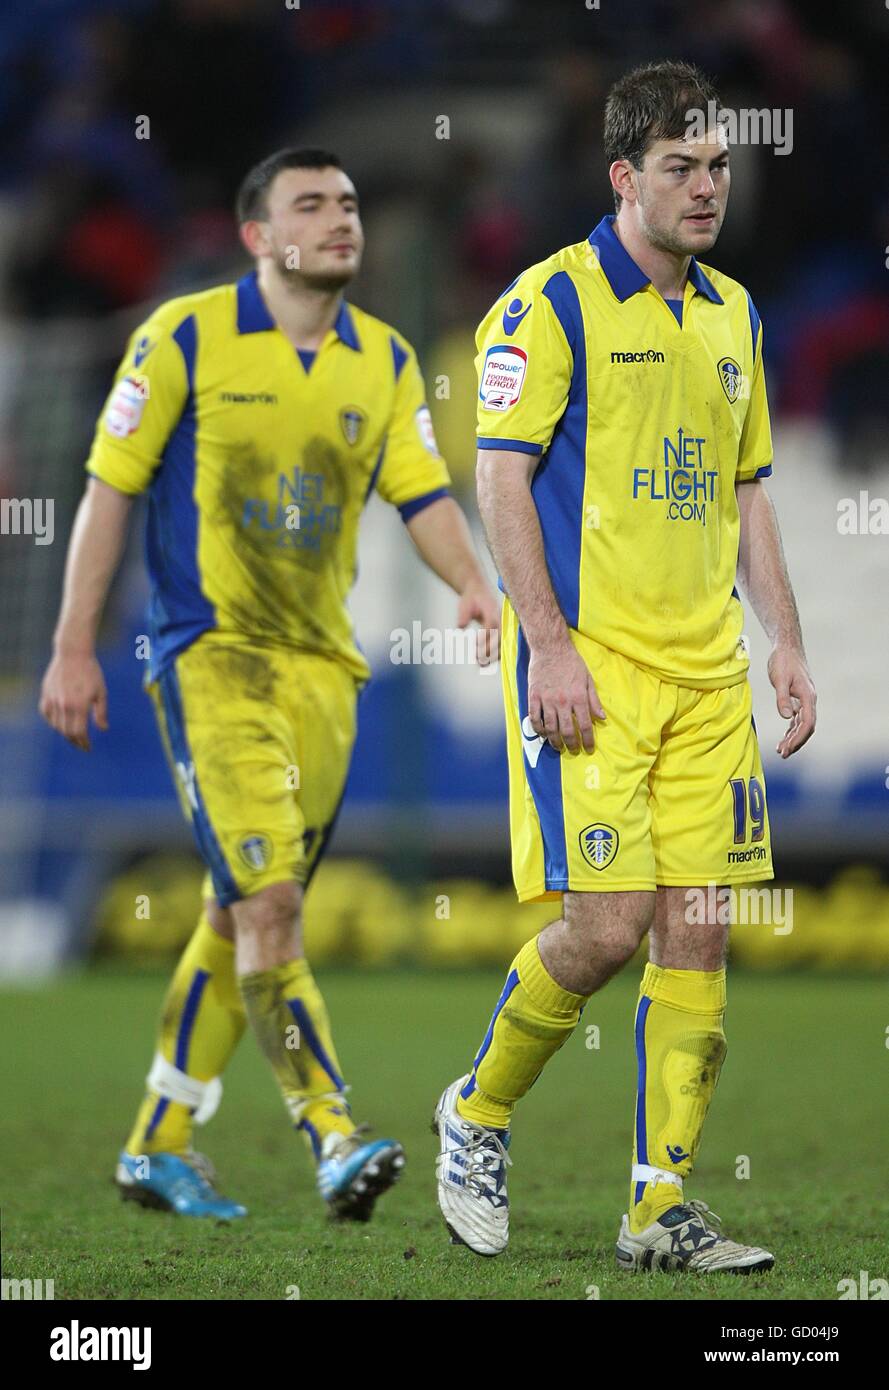 Soccer - npower Football League Championship - Cardiff City v Leeds United - Cardiff City Stadium. Leeds United's Ben Parker (right) and Robert Snodgrass look dejected after the final whistle Stock Photo